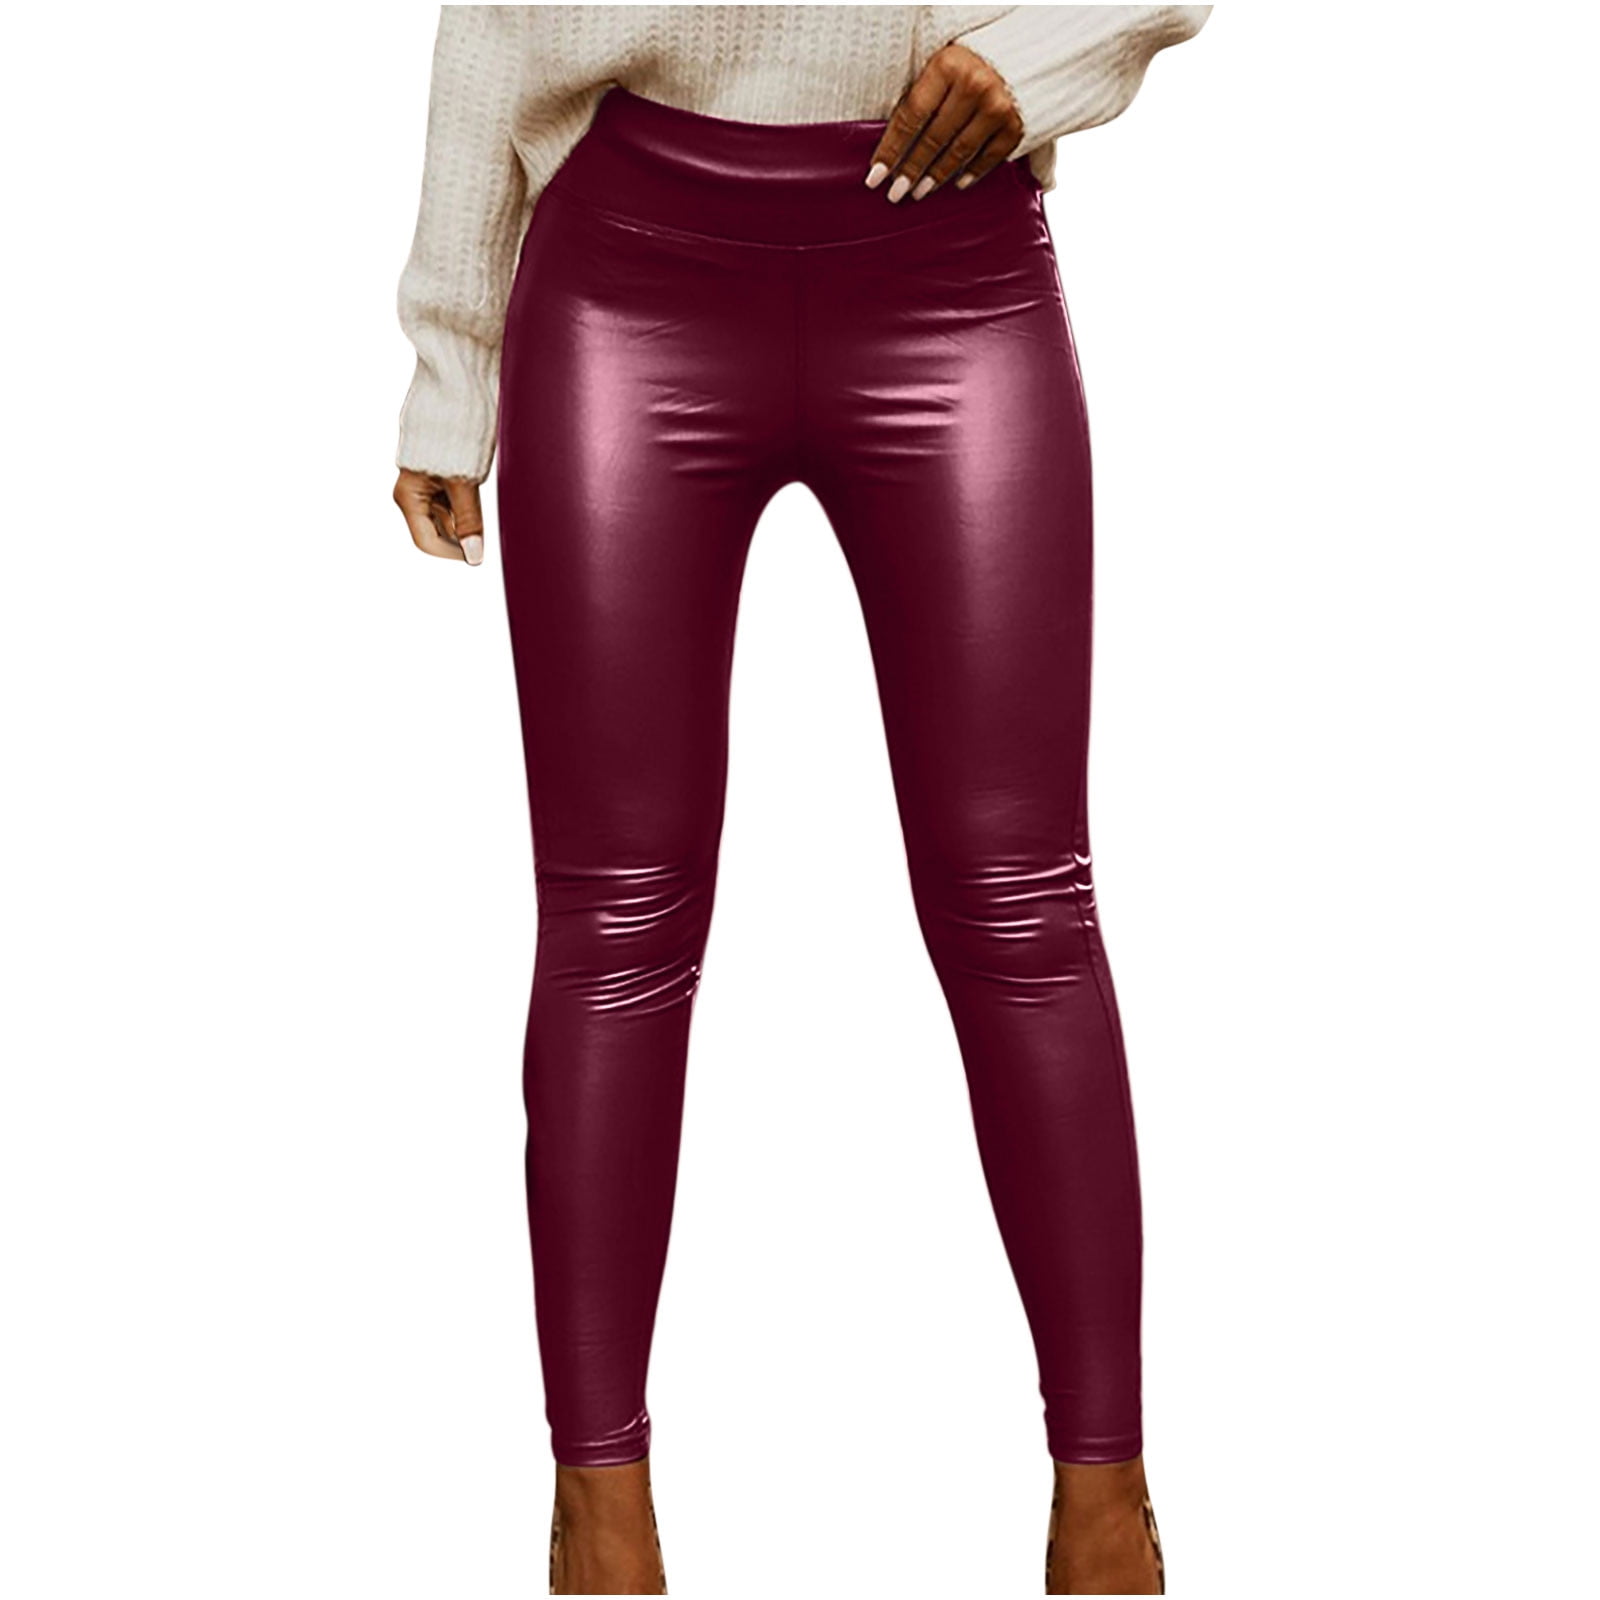 YYDGH Women's Faux Leather Leggings High Waisted Black PU Pleather Pants  Sexy Butting Lifting Tights Red XL